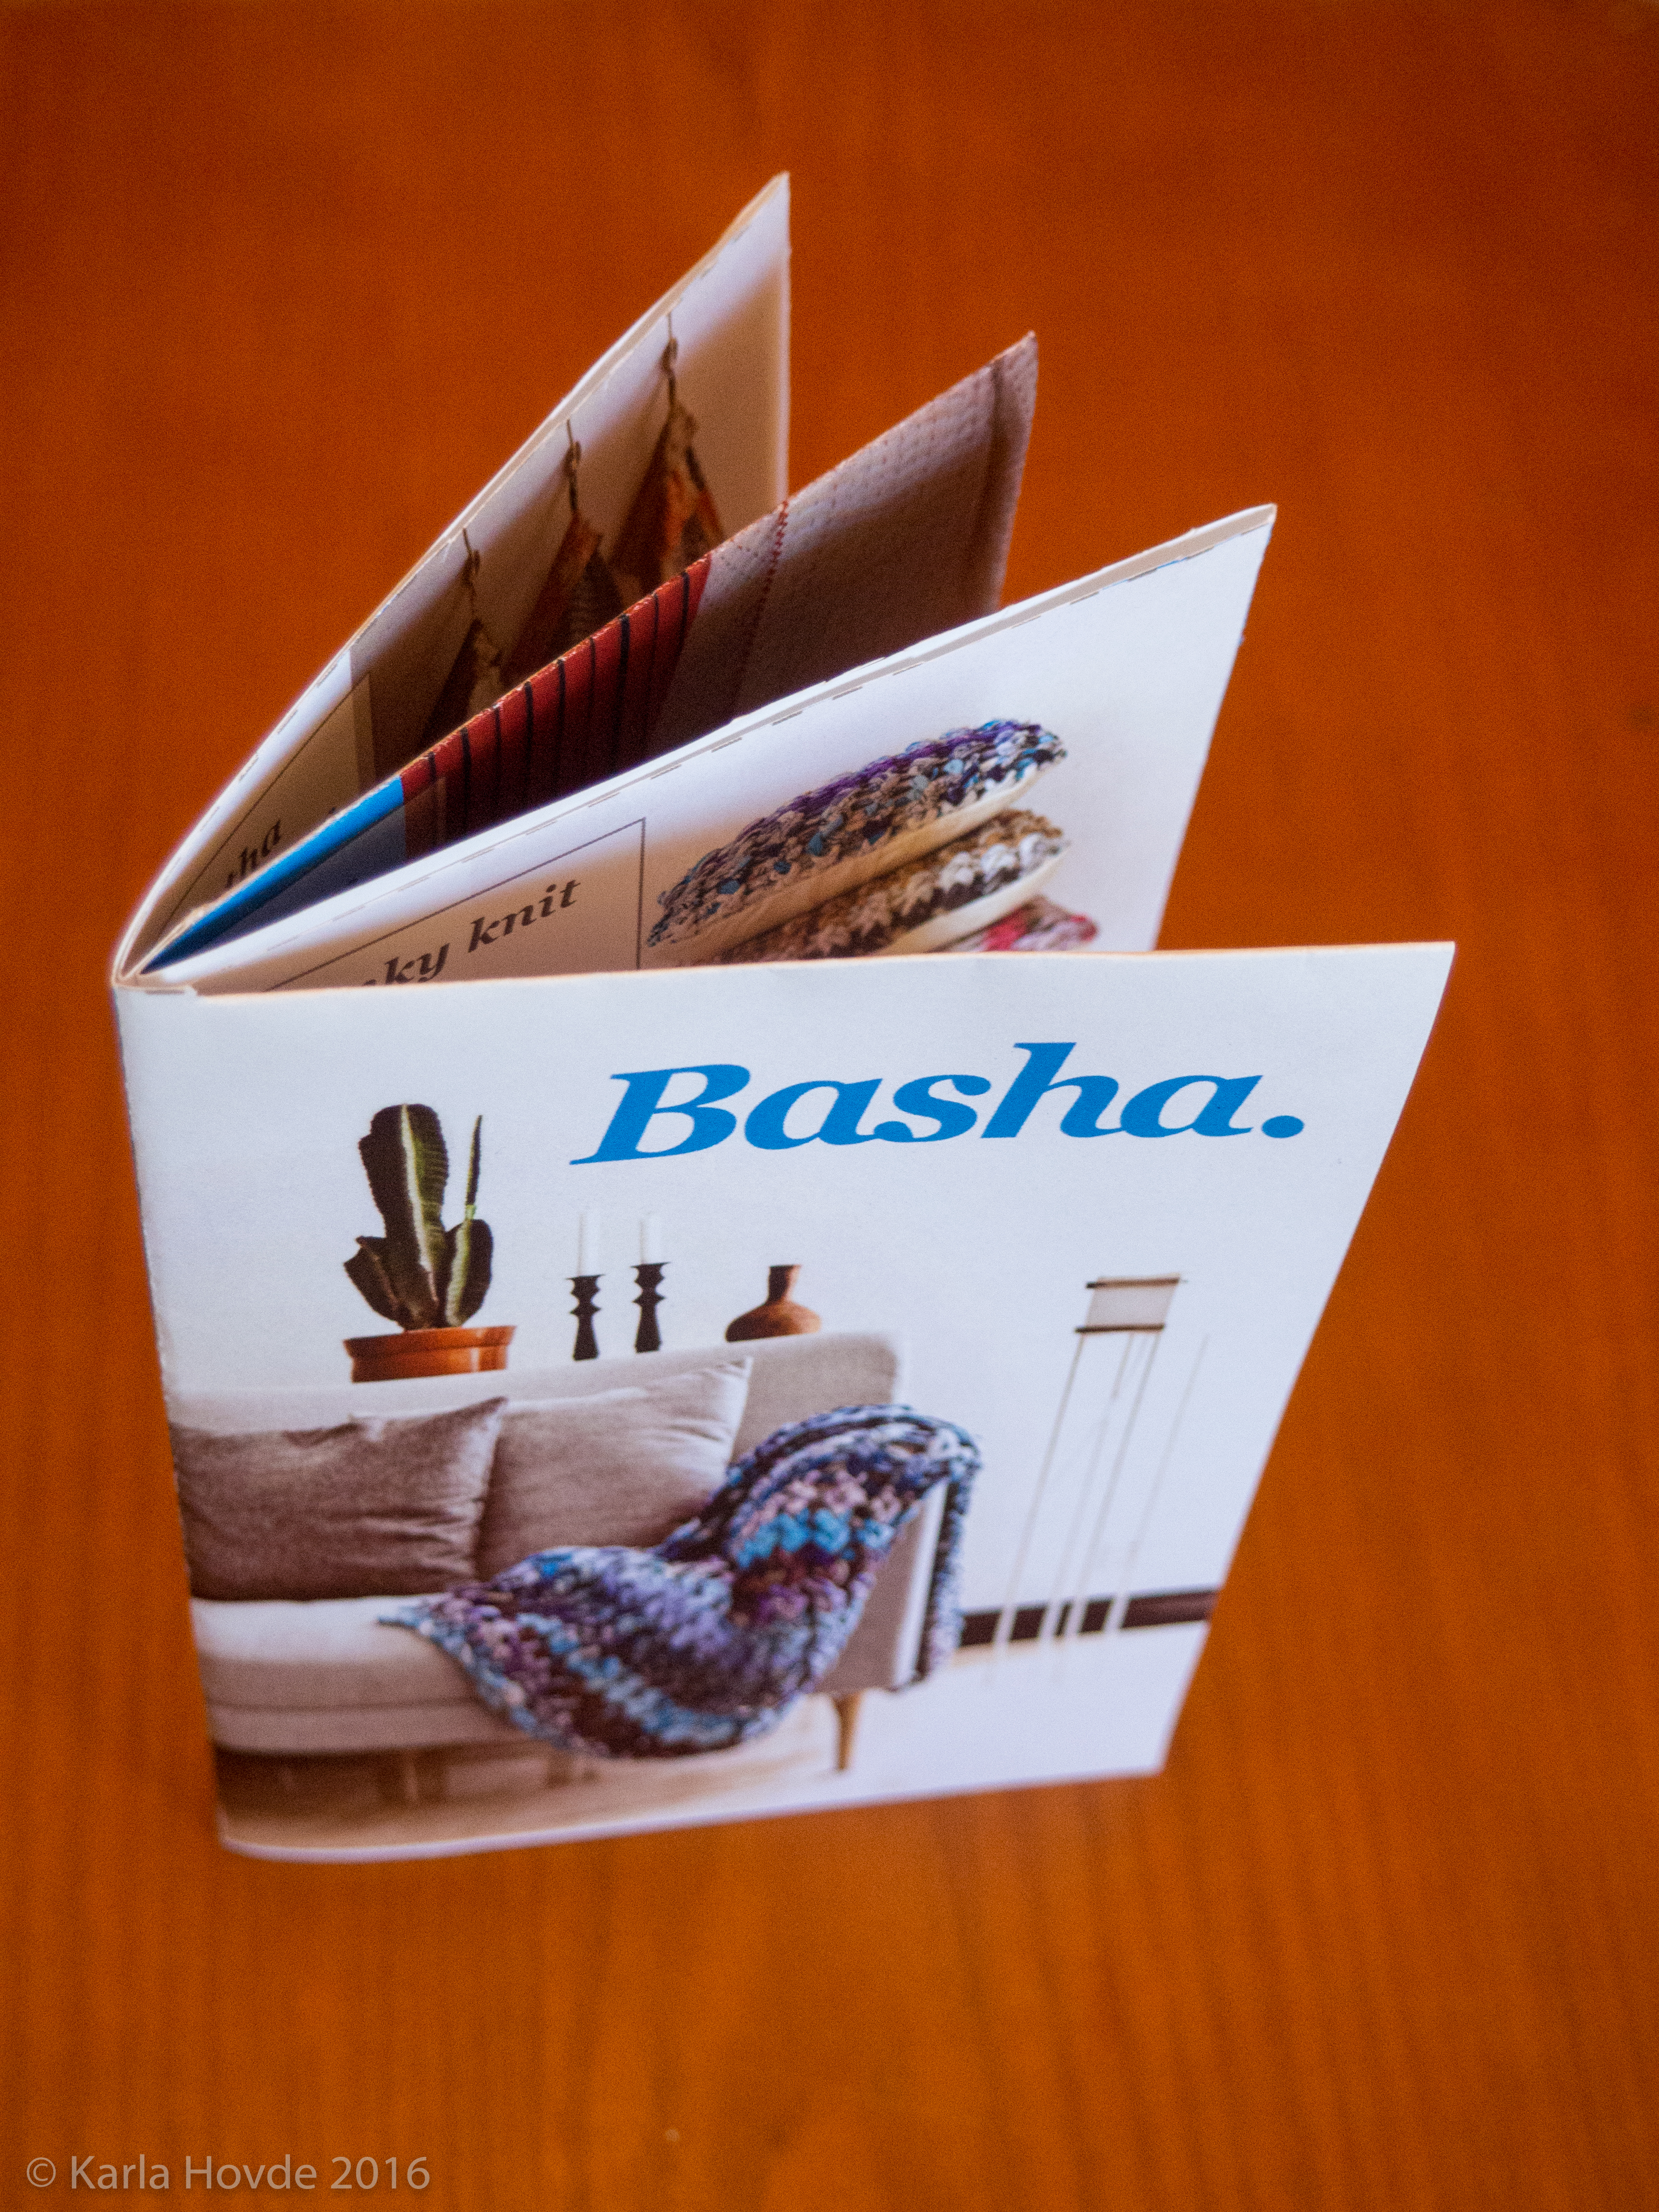 Photo of miniature Basha product catalogue made from one sheet of cleverly folded paper